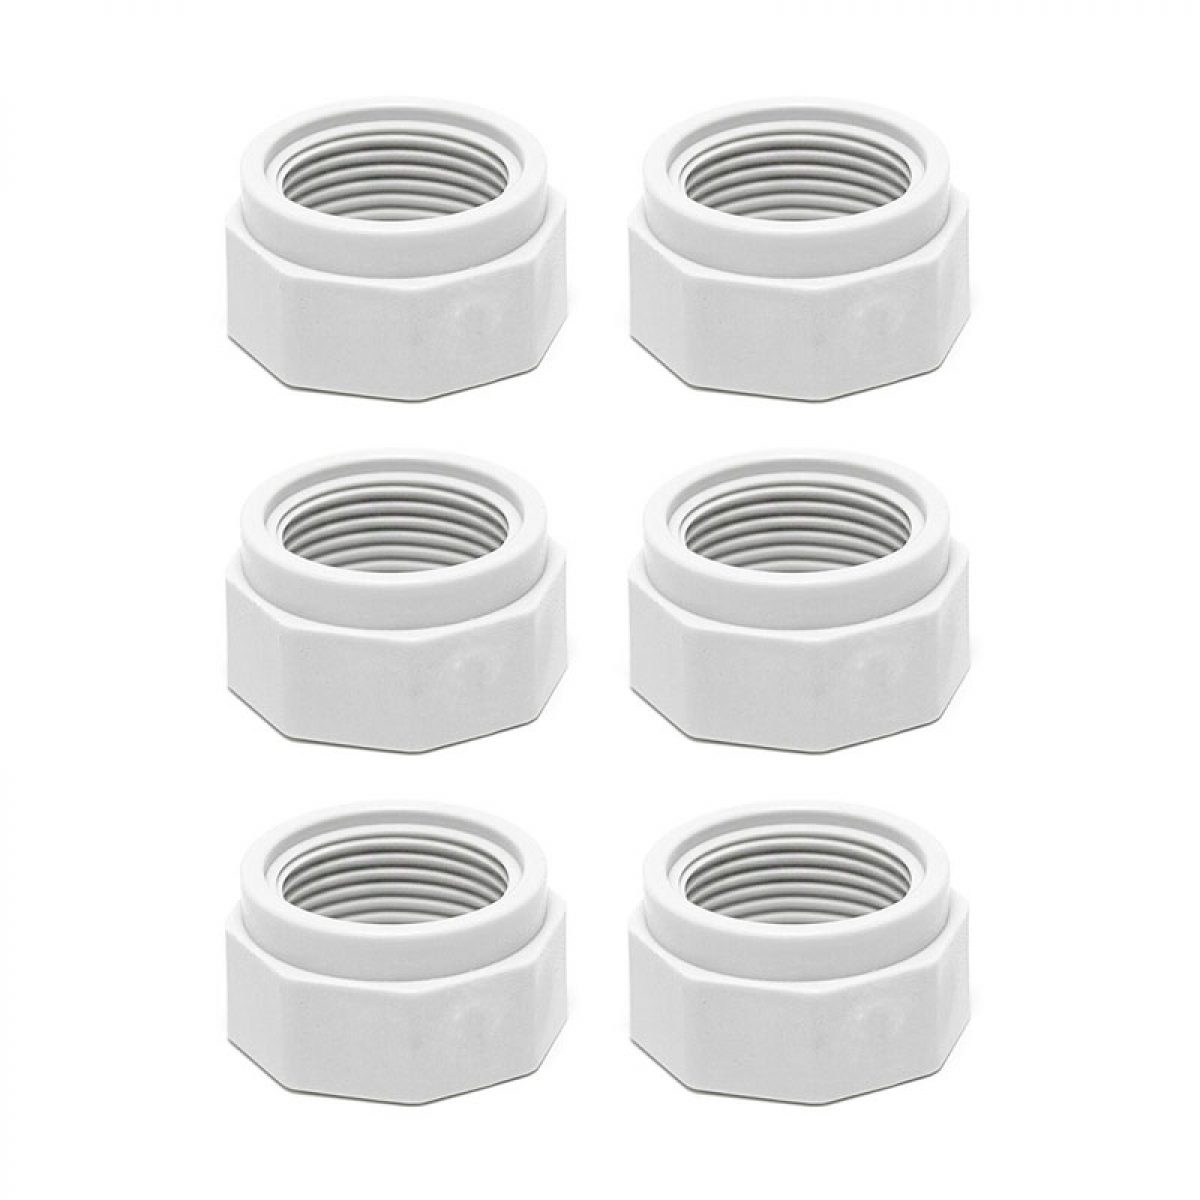 Details about   Feed Hose Nut Replacement For Polaris Cleaners 180 280 380 480 D15 D-15 Multipac 